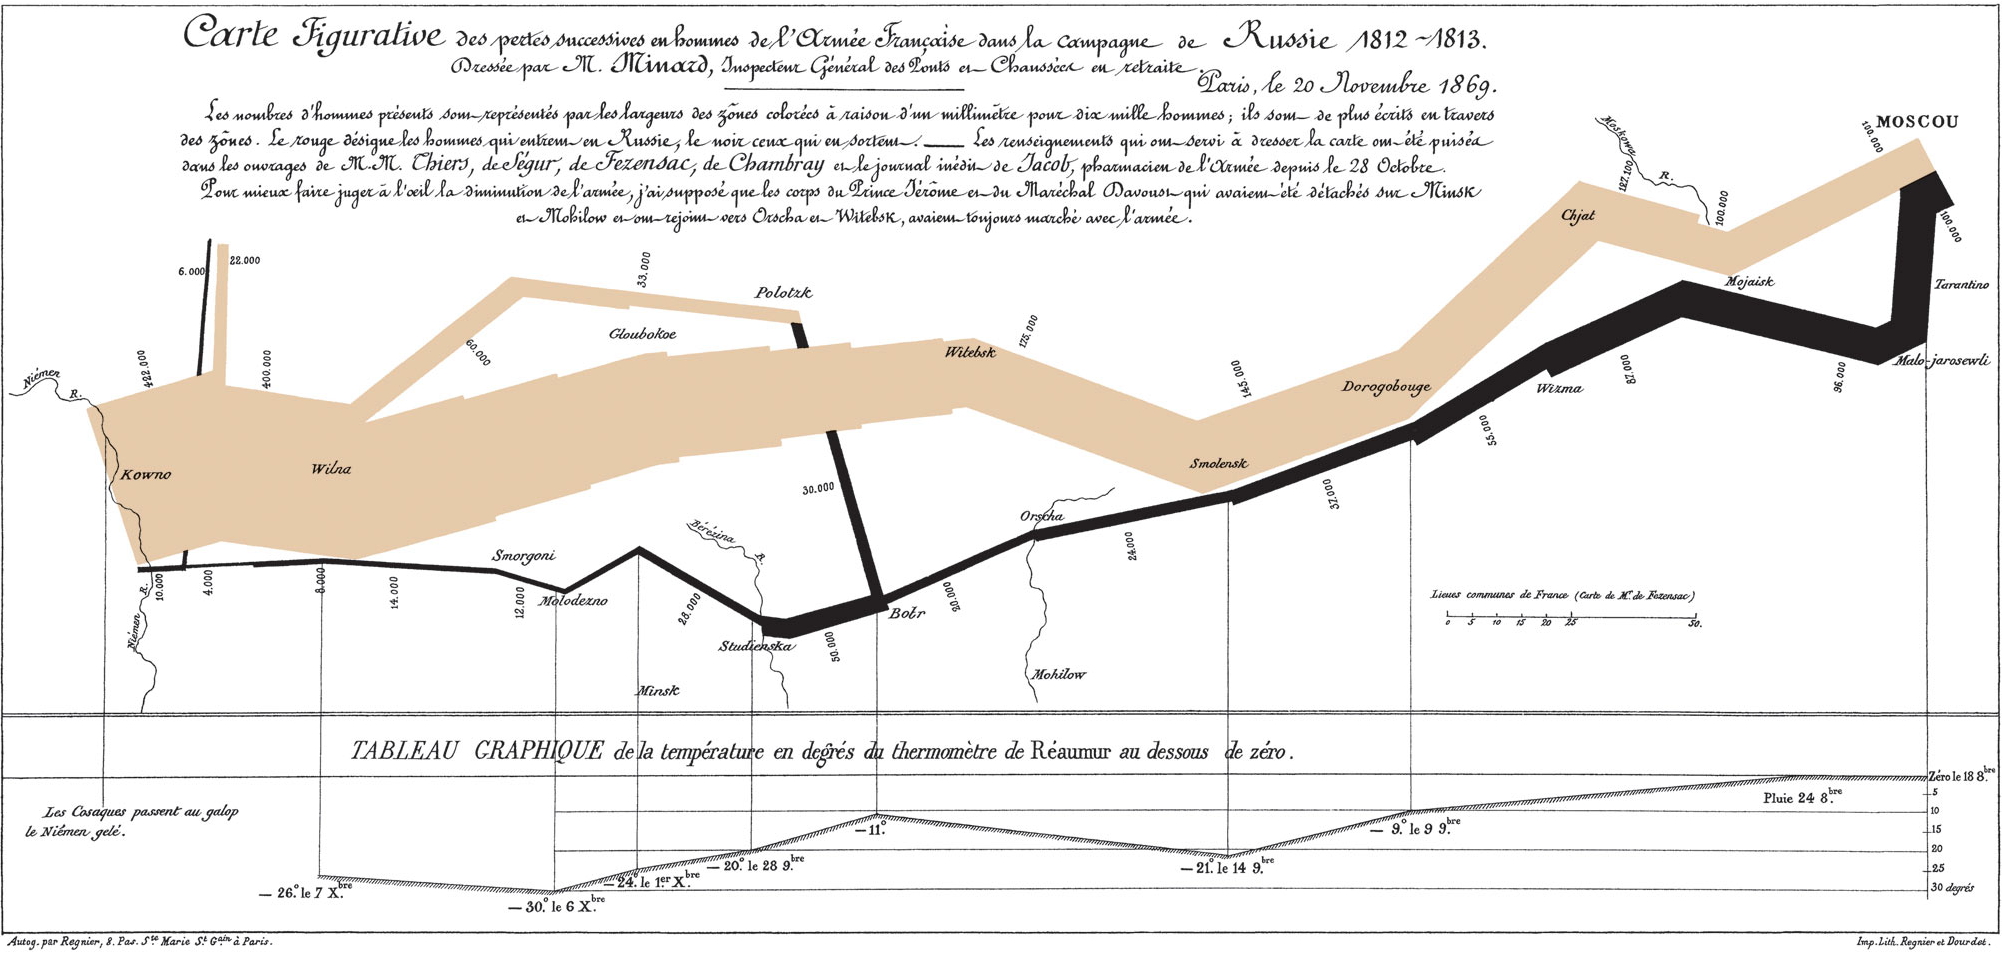 Joseph Minard's 1861 graphic showing Napoleon's losses
        during his 1812 march to and from Moscow